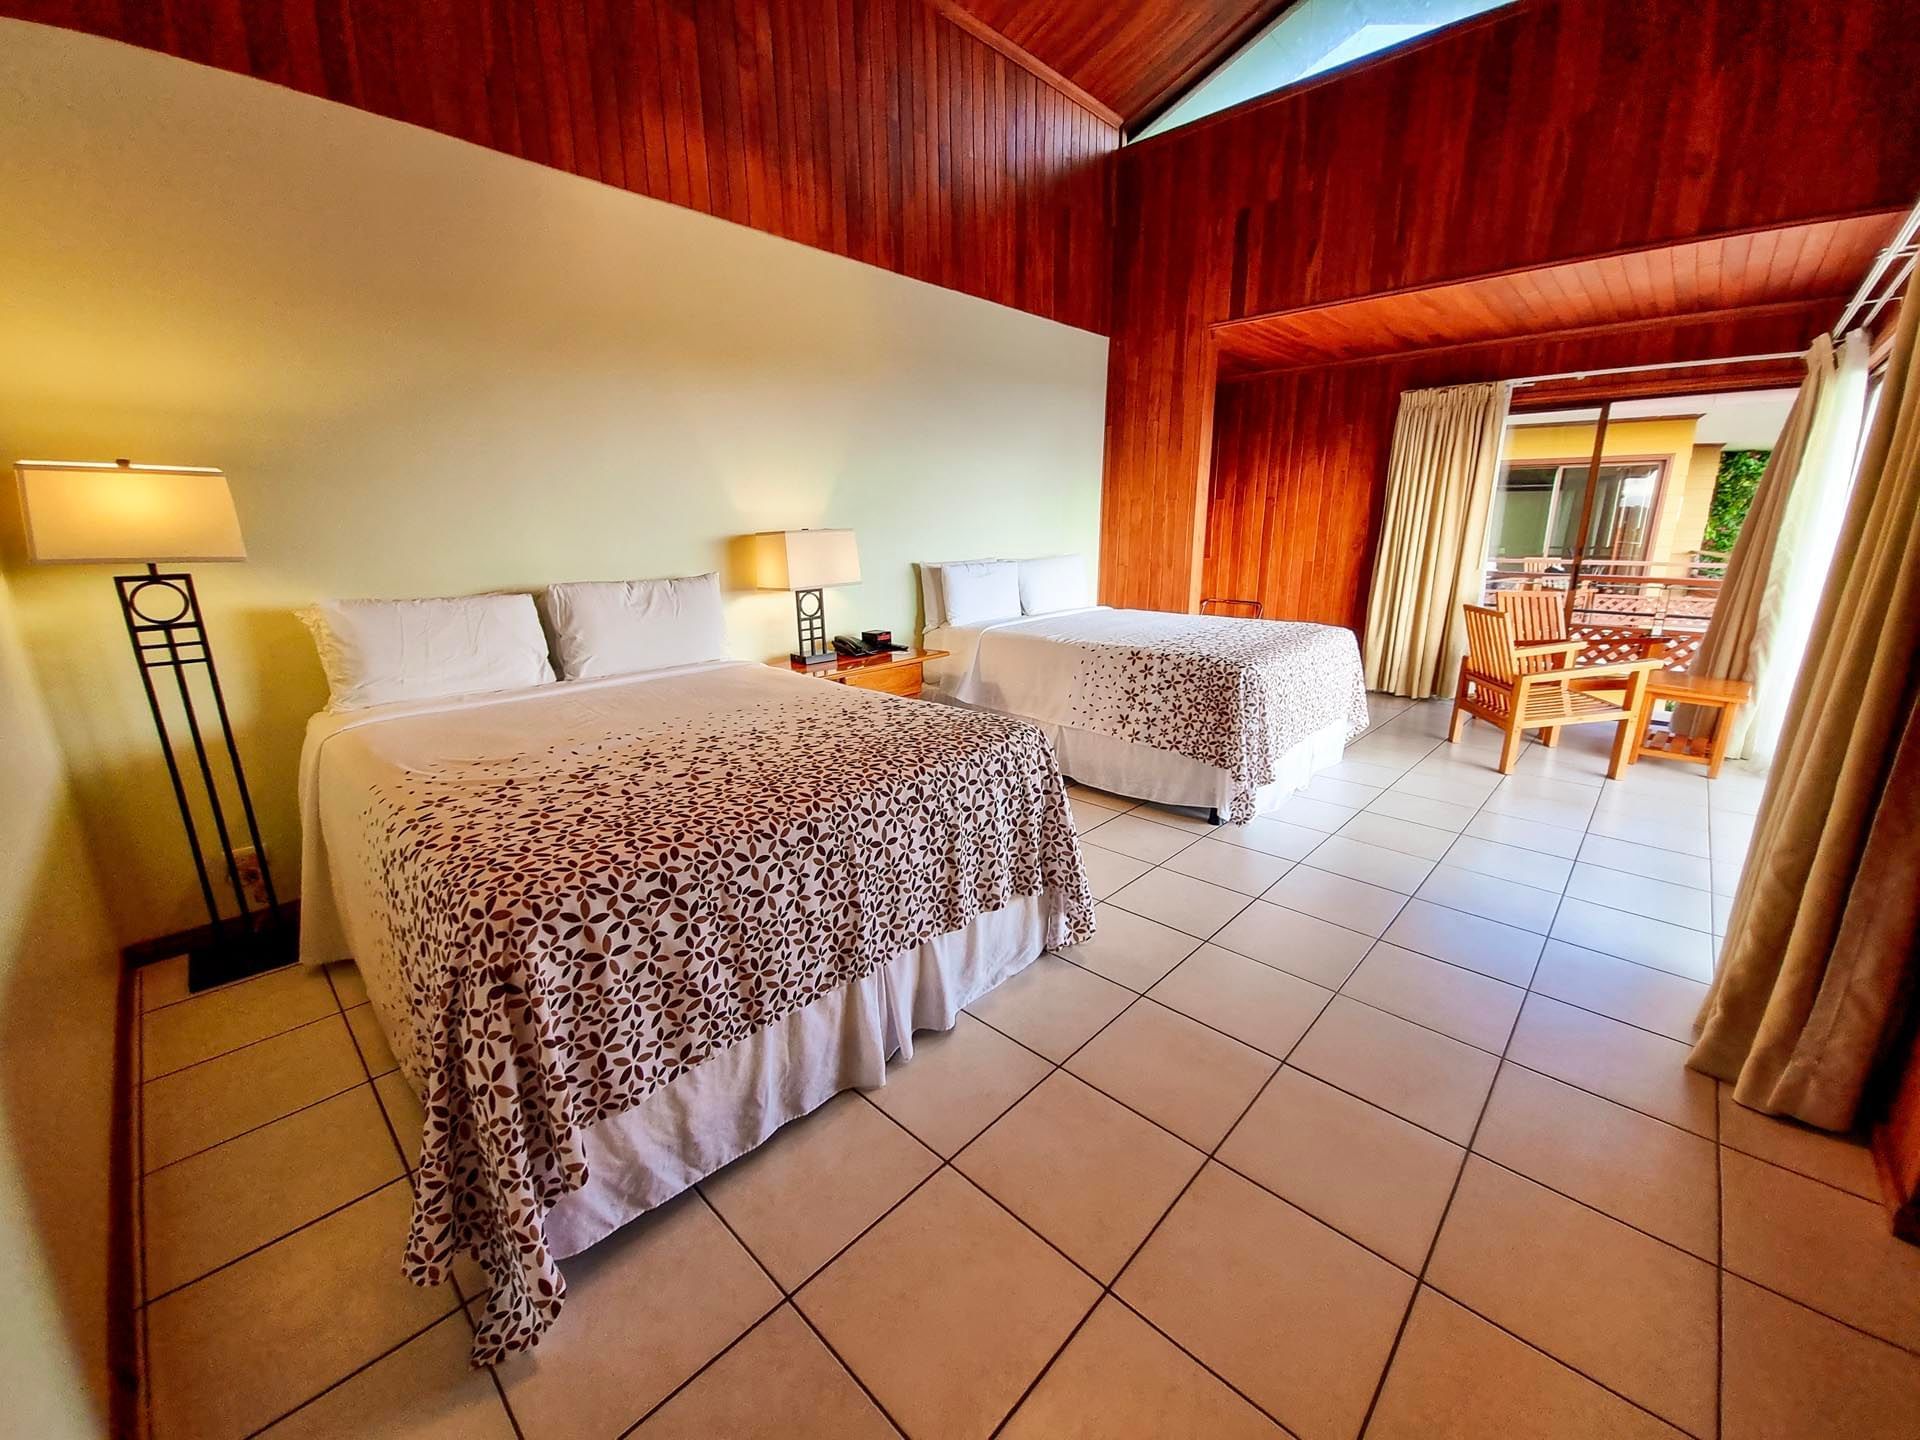 Interior of Deluxe Room with beds at Ficus Lodge